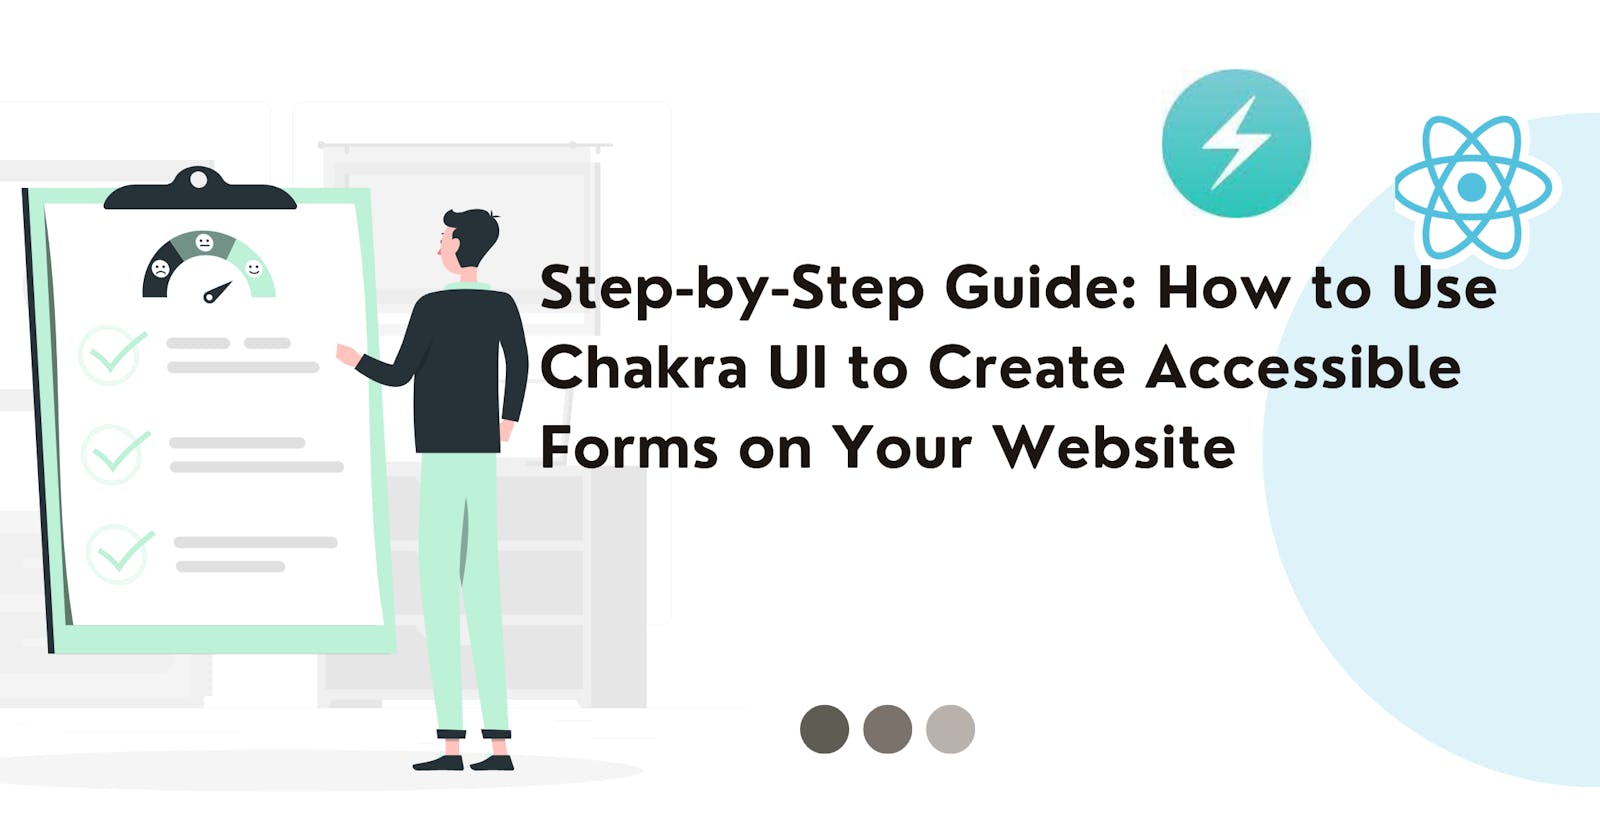 Step-by-Step Guide: How to Use Chakra UI to Create Accessible Forms on Your Website